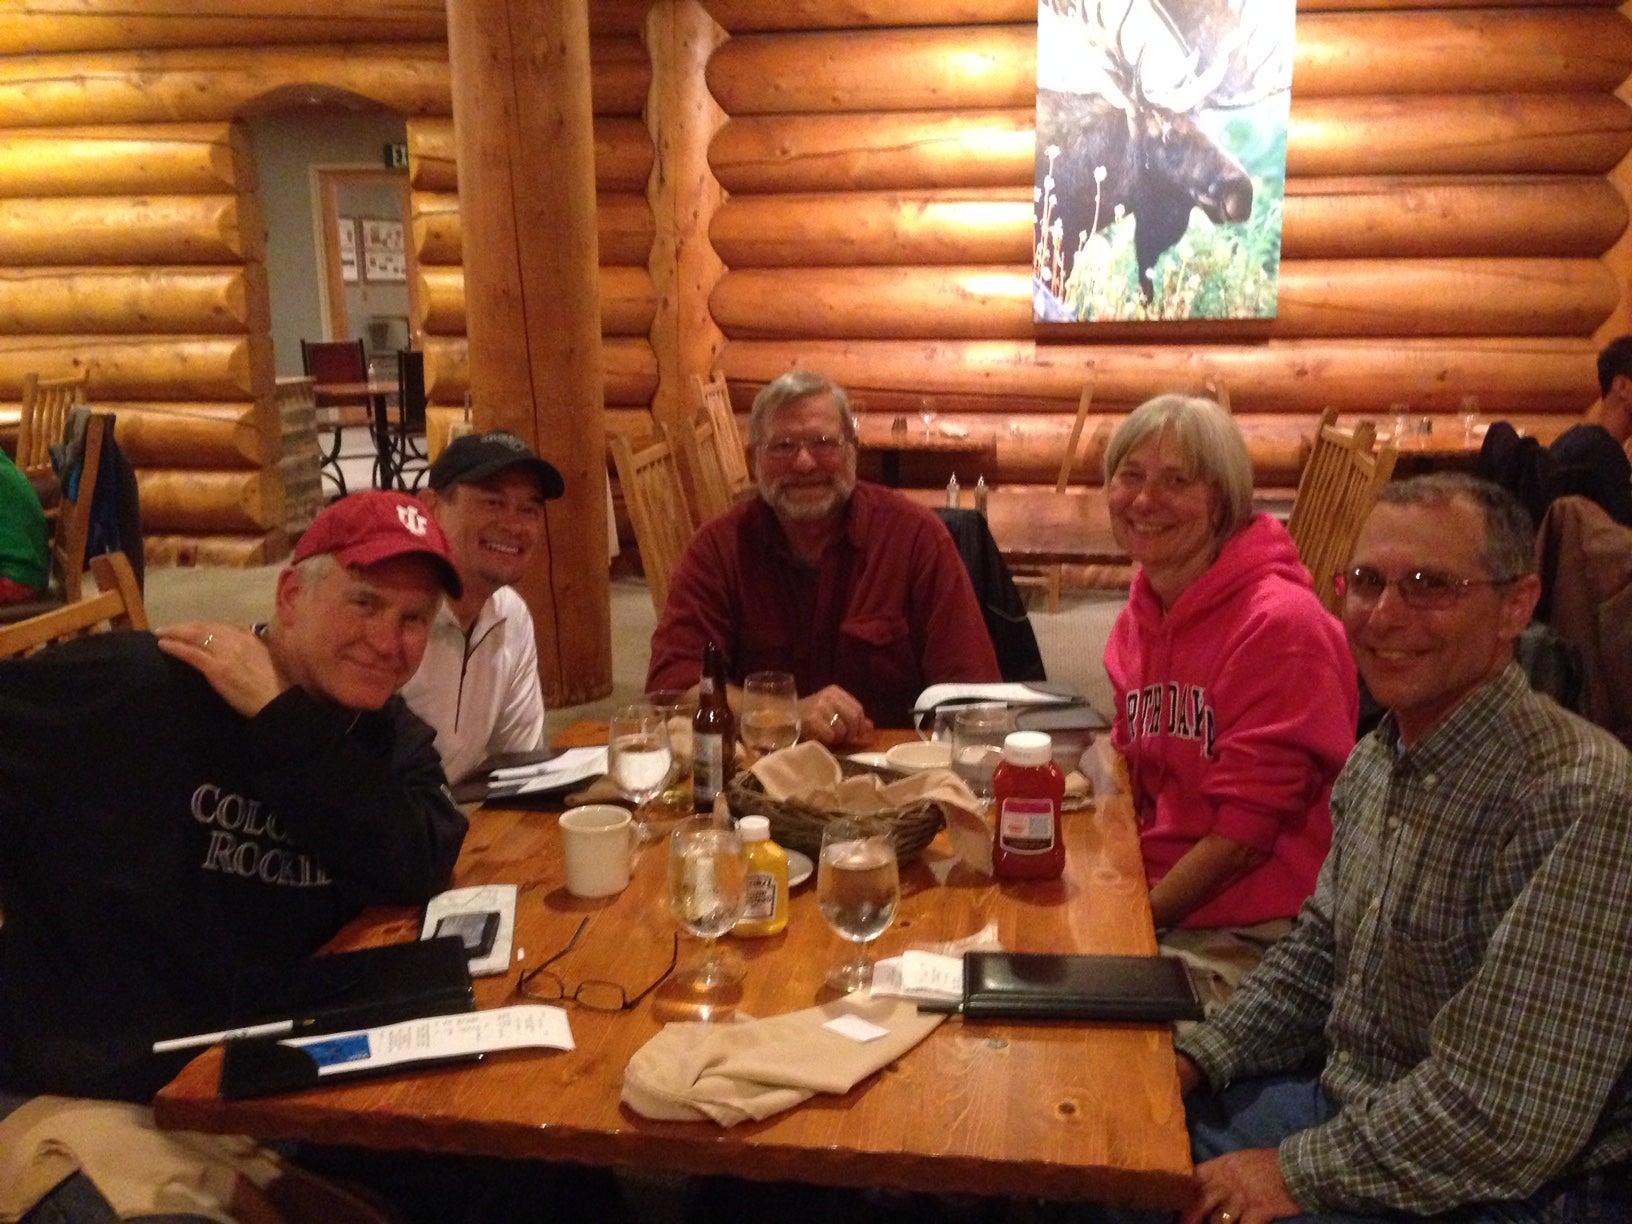 Dinner with my dad and friends at the lodge